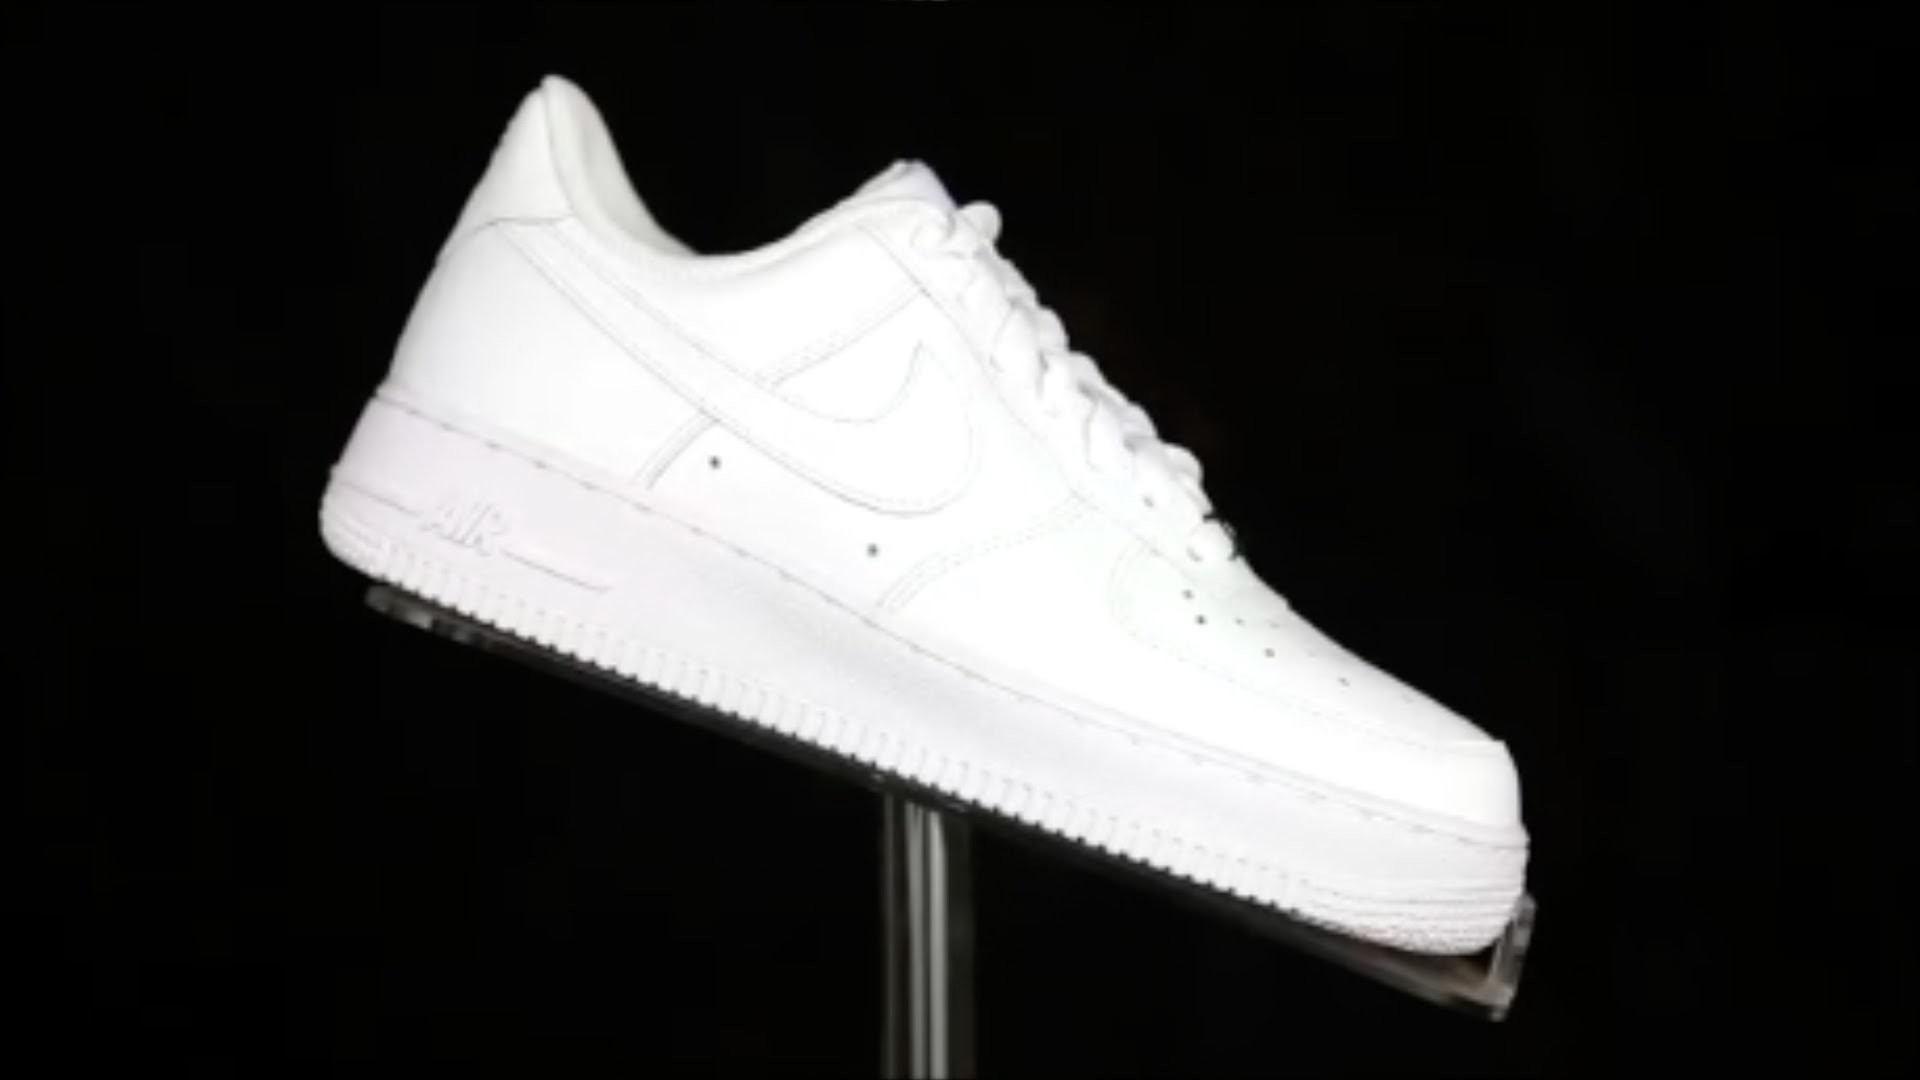 Nike Air Force One Wallpaper Hd | vlr.eng.br